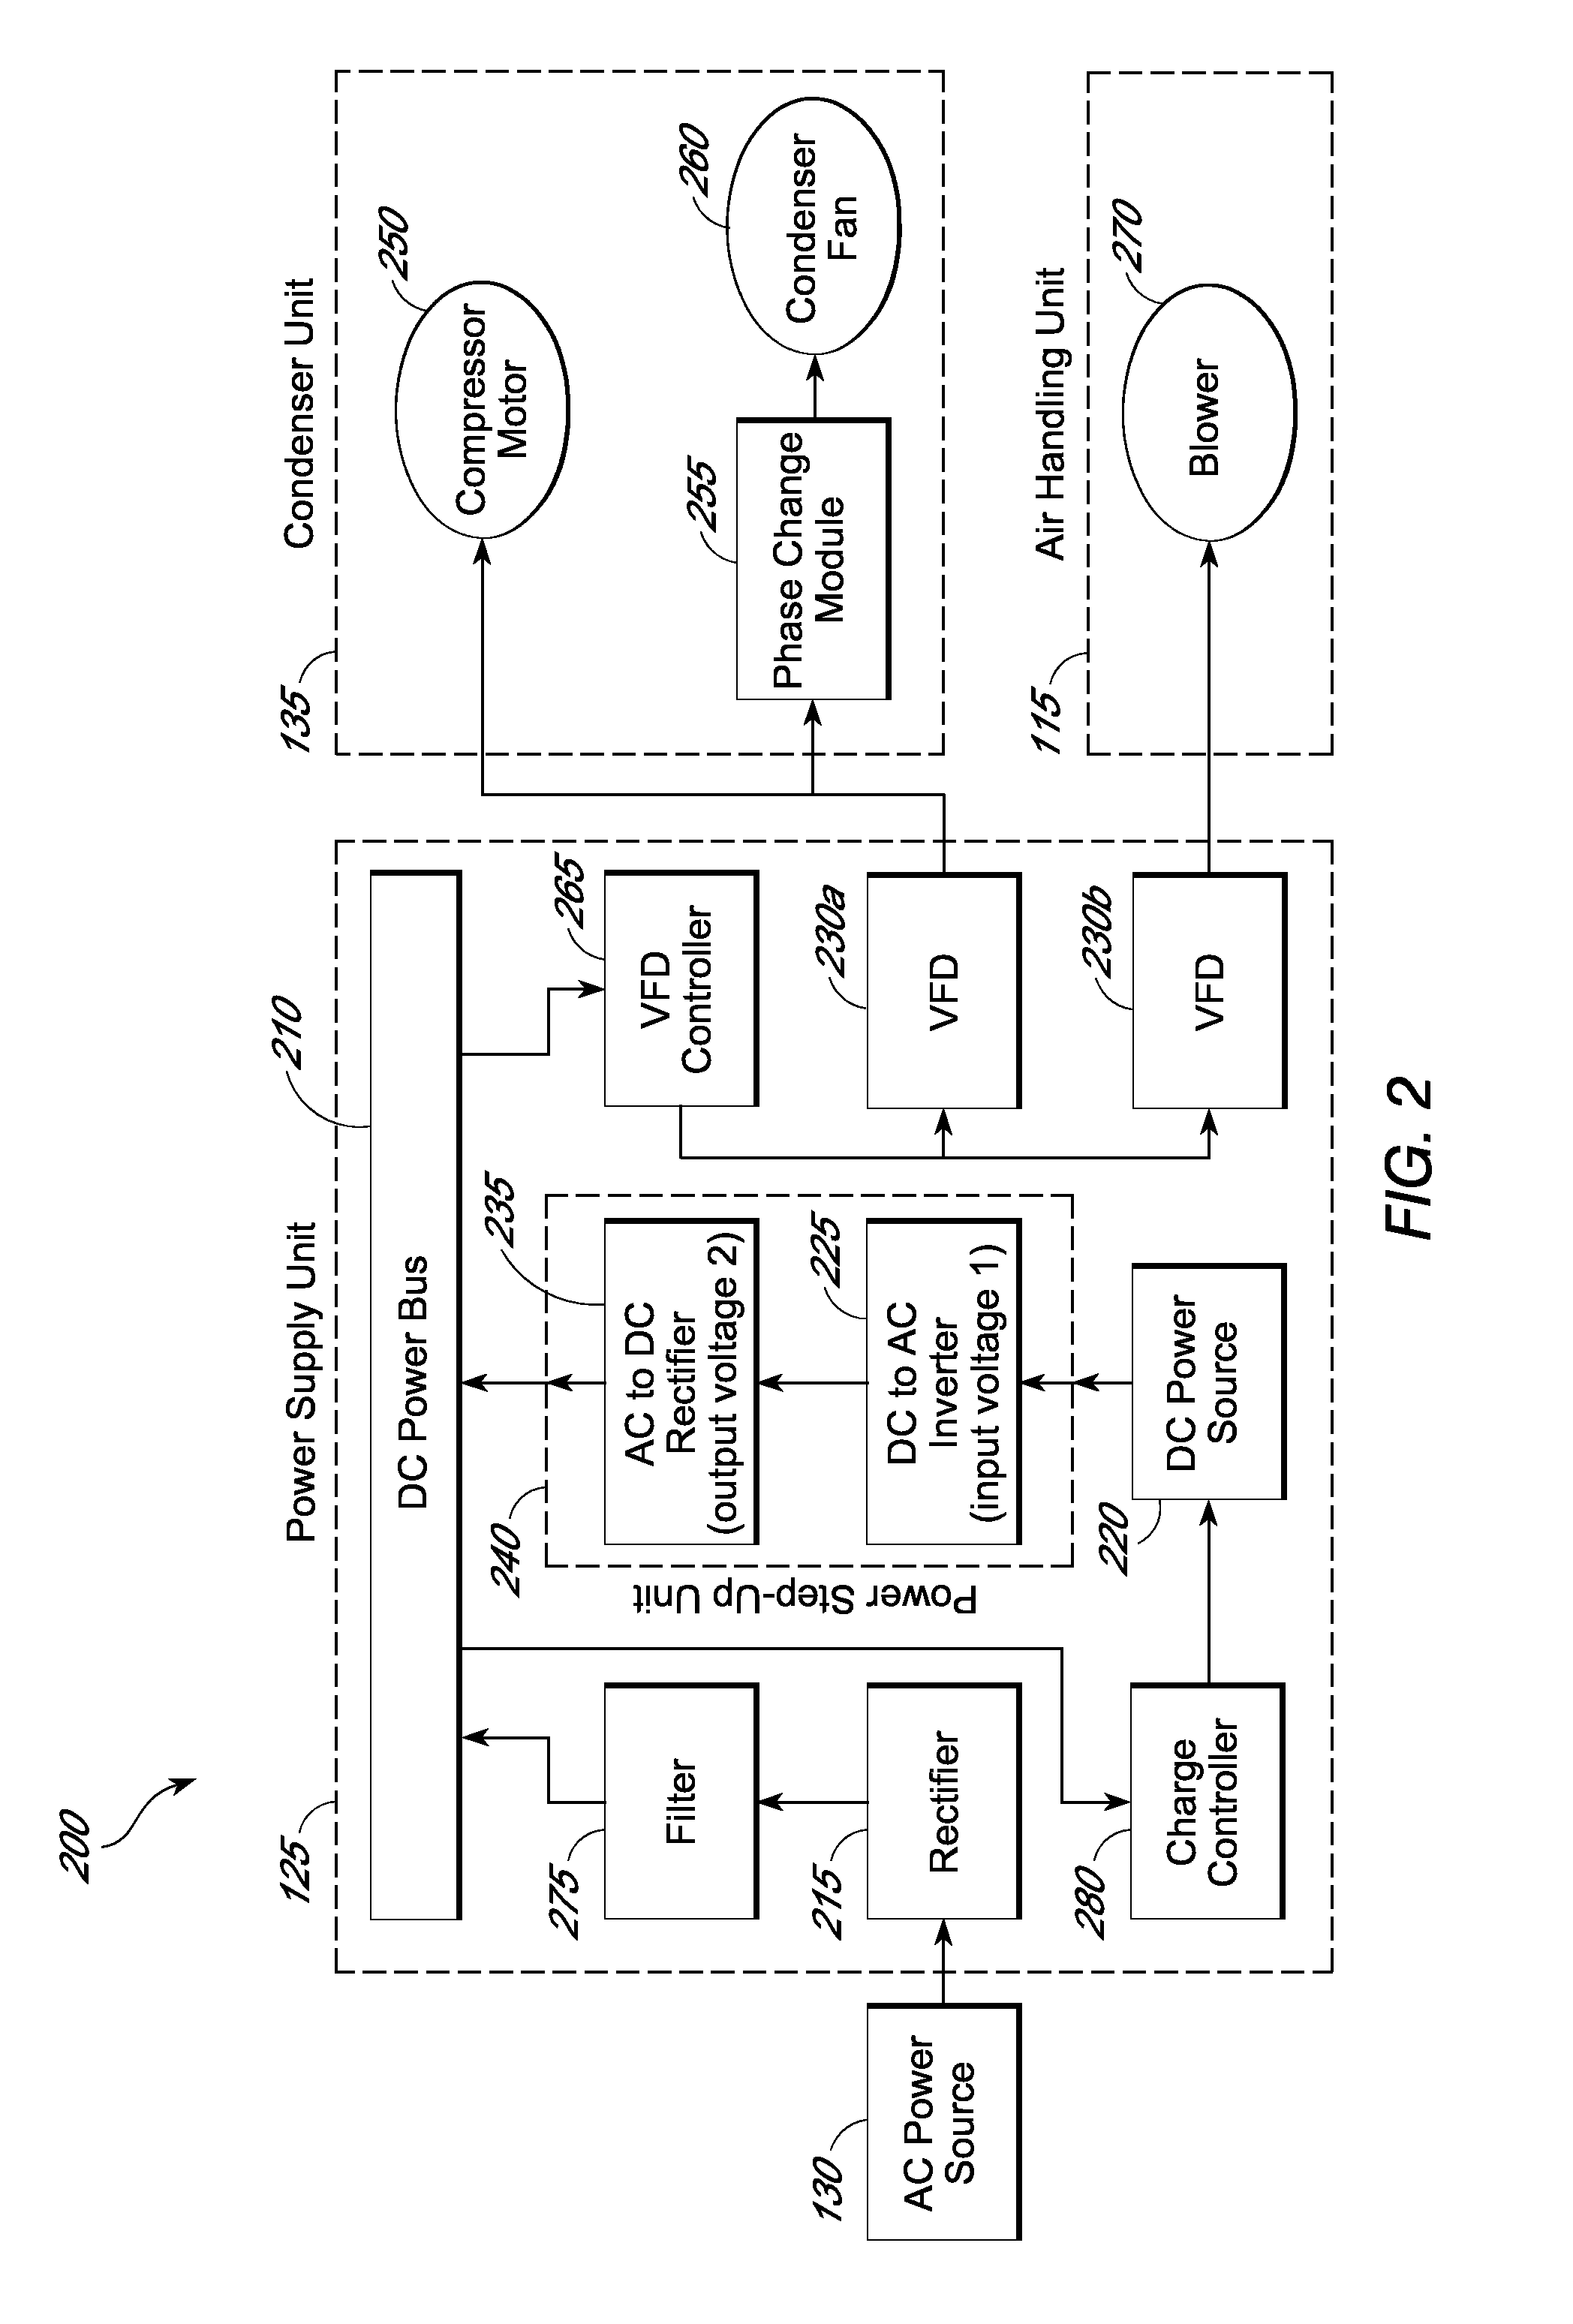 Photovoltaic power source for electromechanical system